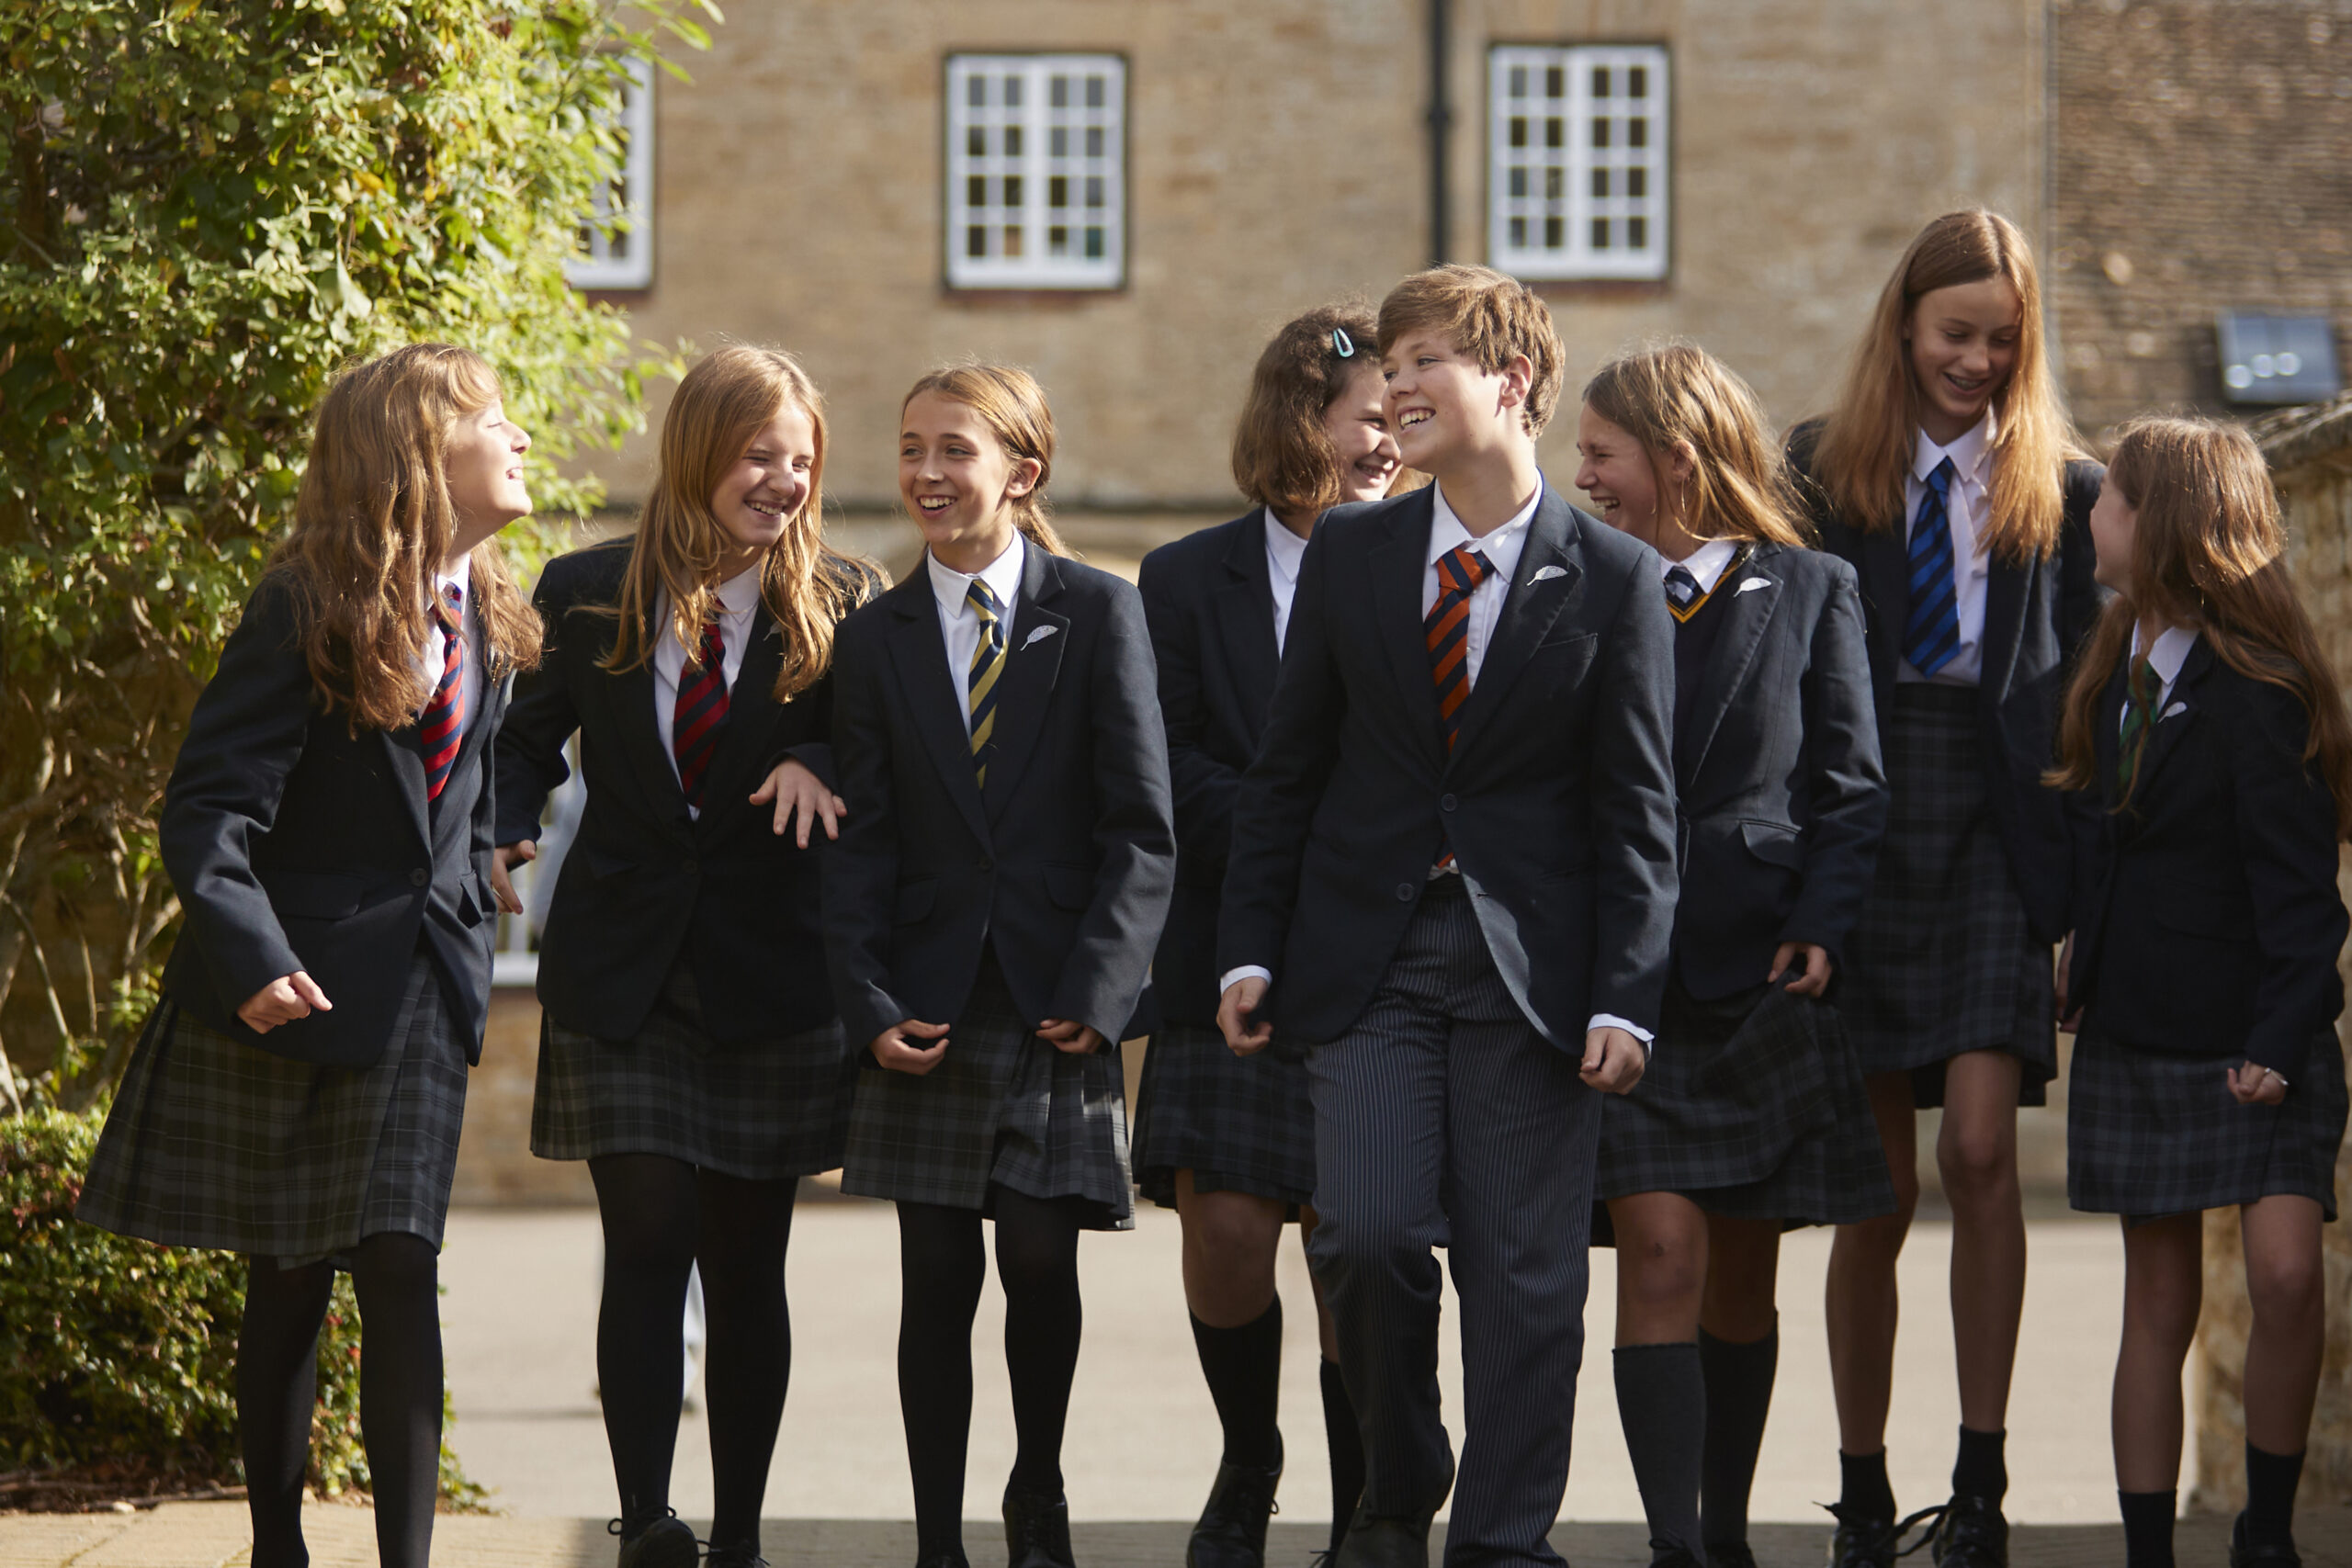 Senior School pupils relaxed in School grounds -Discover Cokethorpe - An independent day school - A co-educational through school